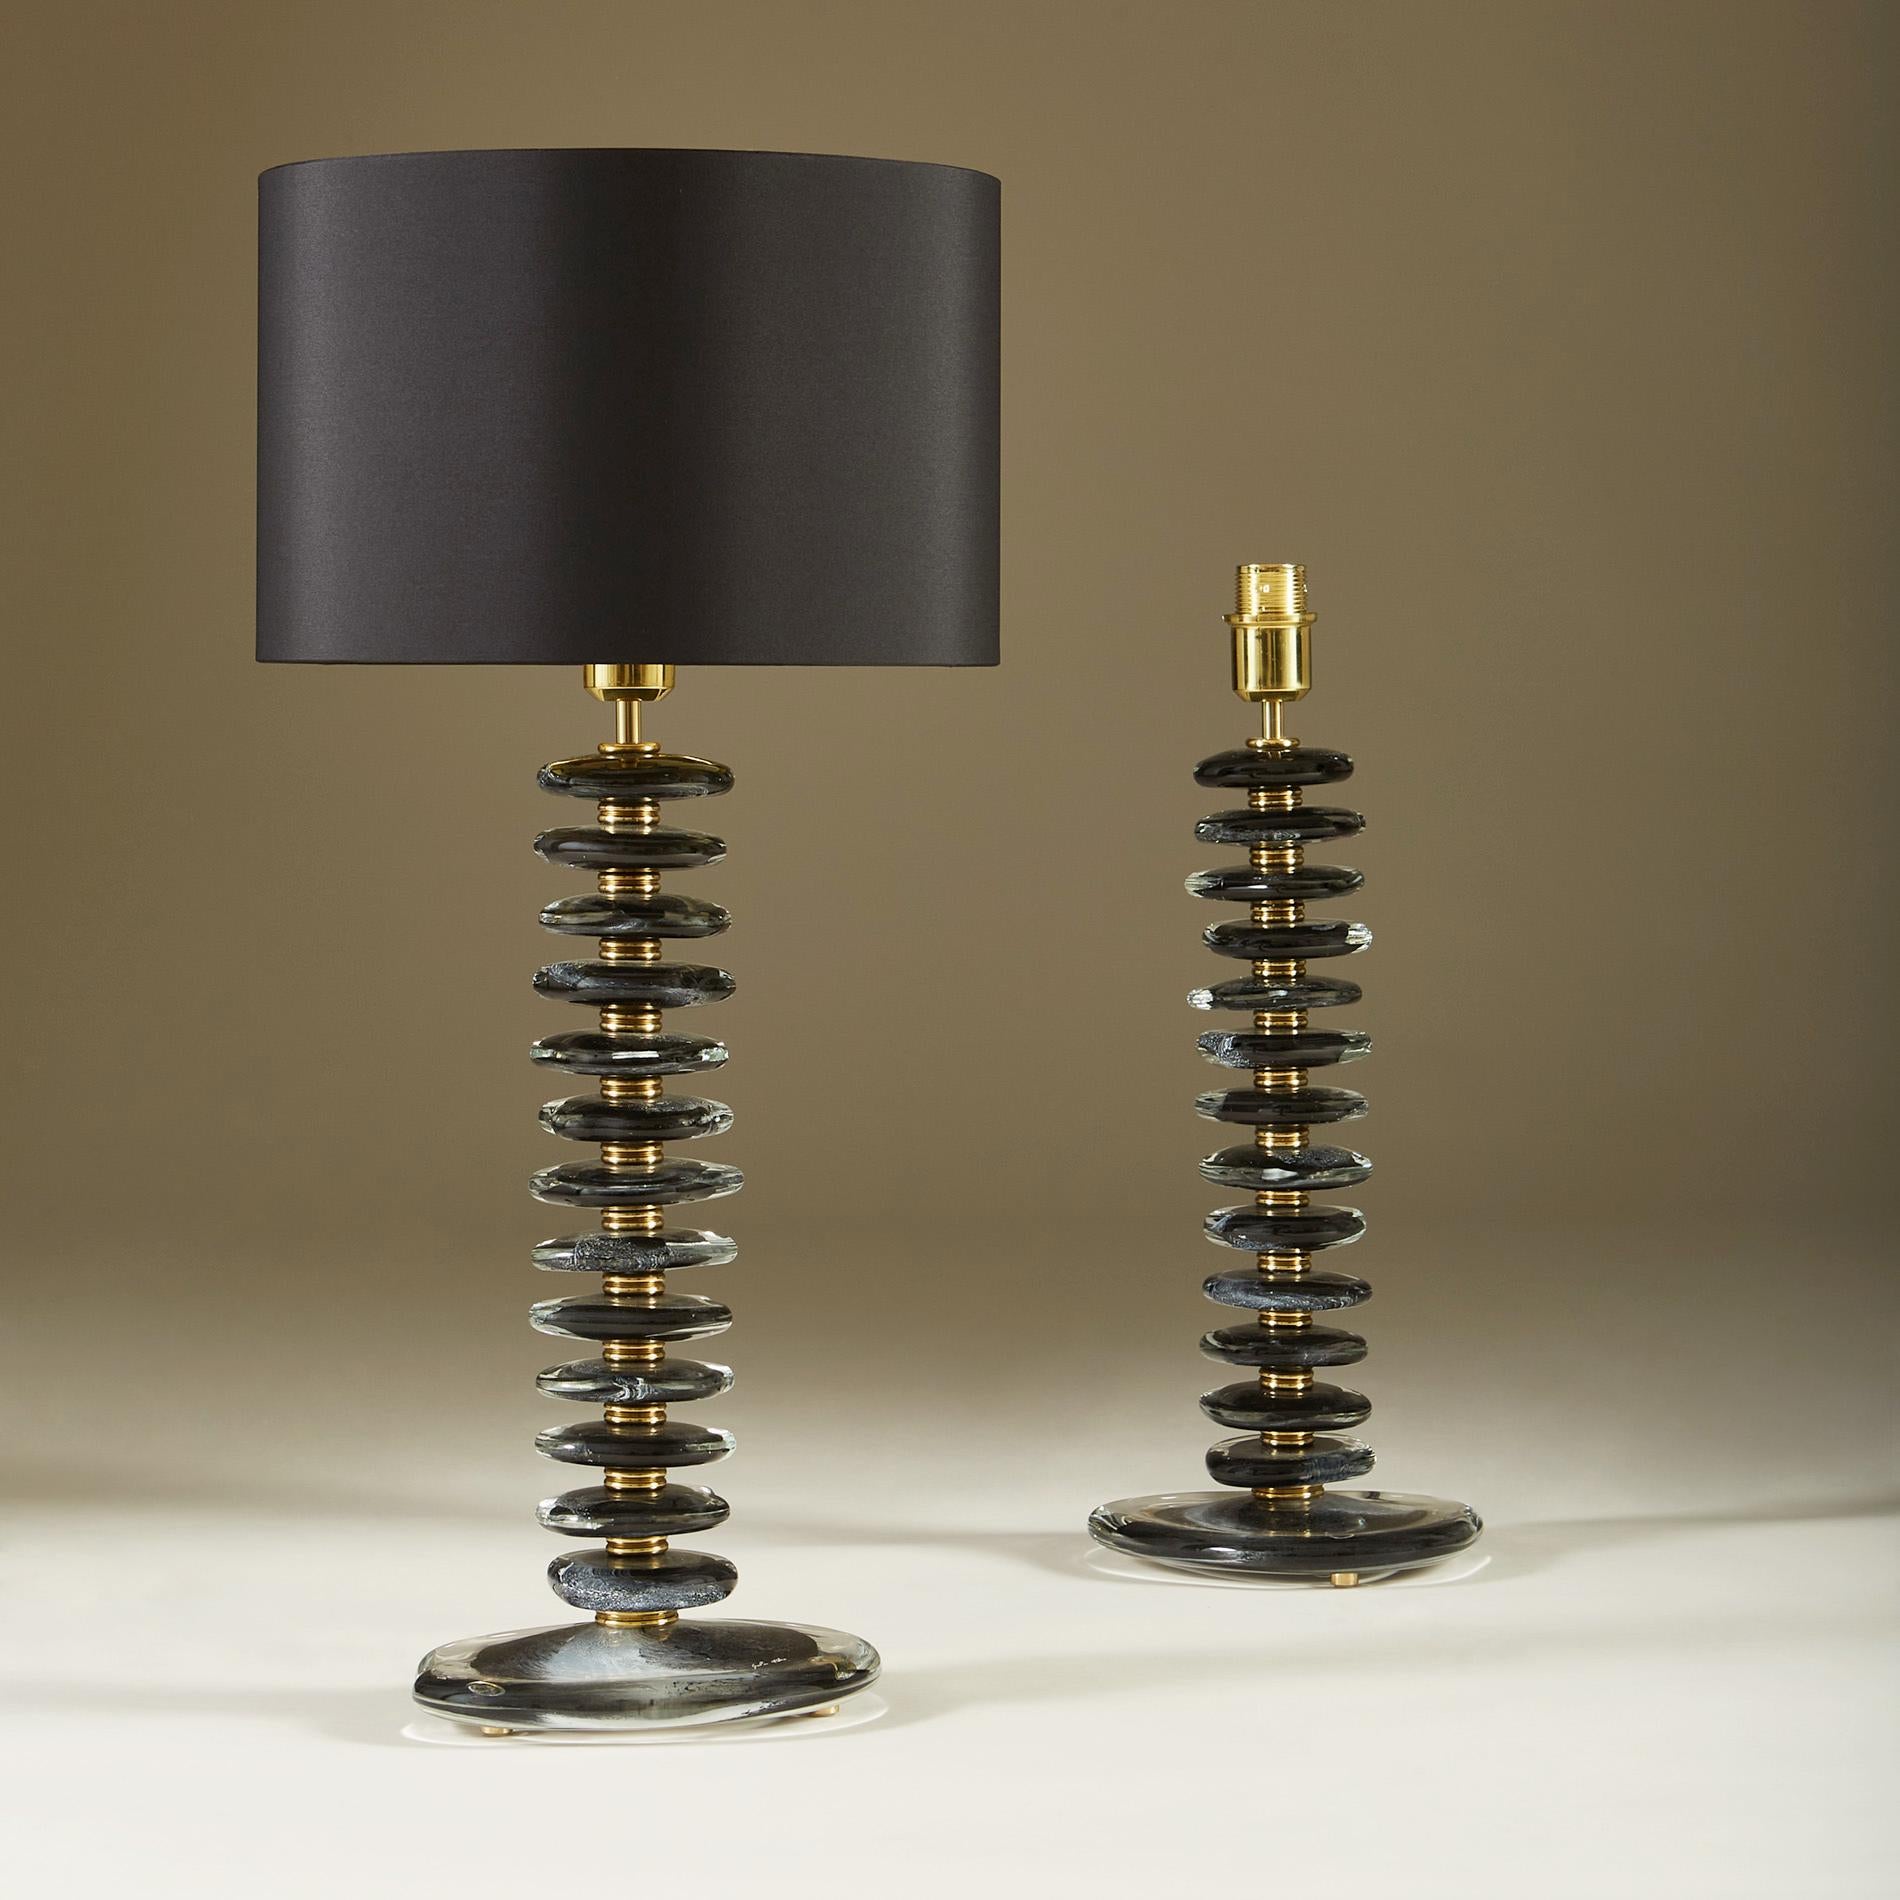 Substantial pair of contemporary table lamps. Each lamp consists of 12 handmade smooth sculptured pebbles in emerald black with clear and white detail. Each pebble is interspersed with double ribbed sections of brass and a brass lamp fitting. Sits